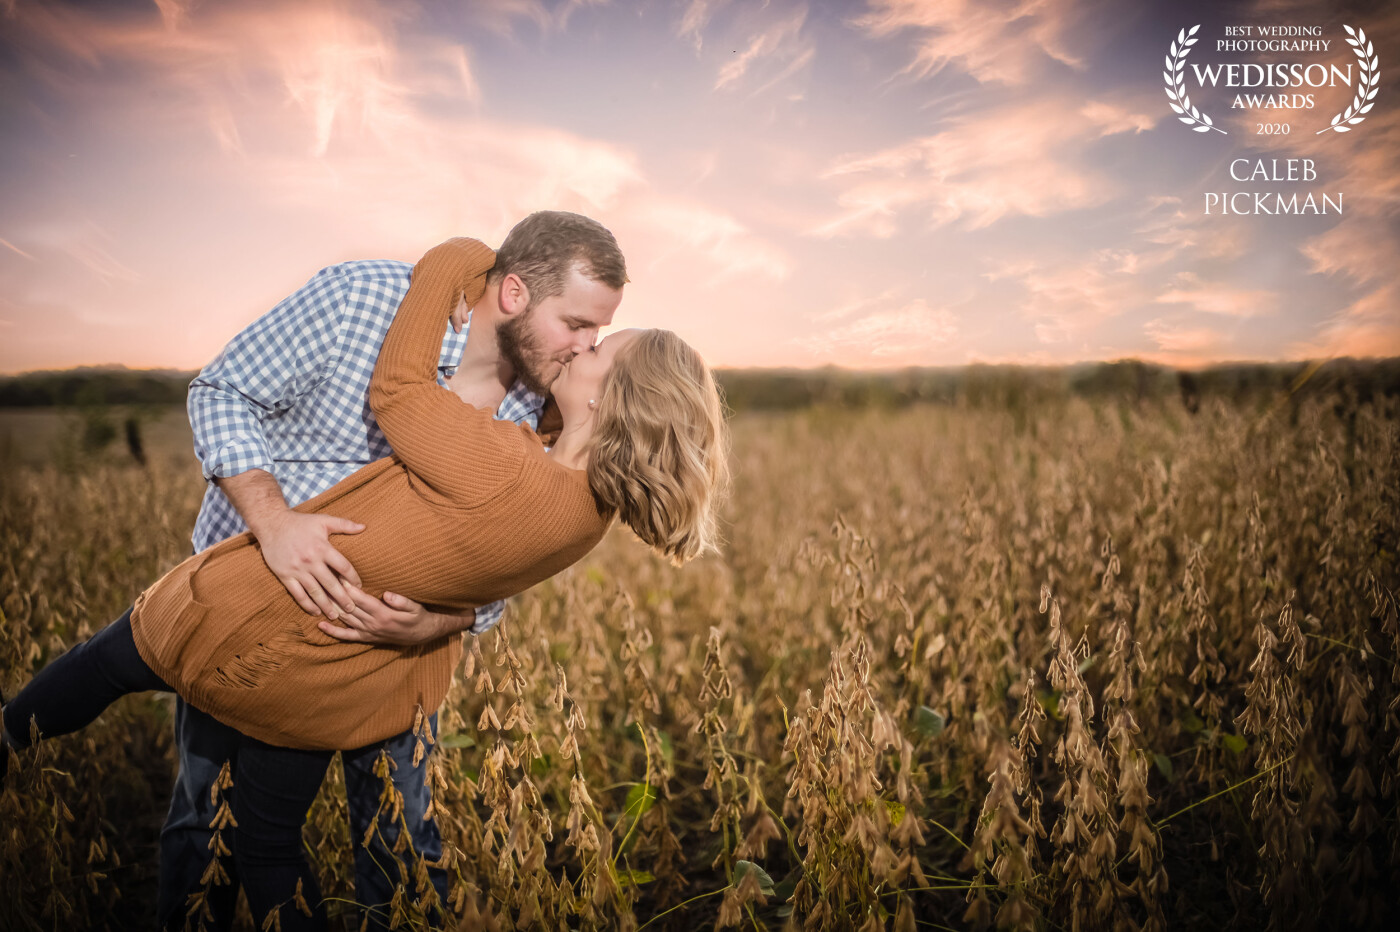 This photo was taken In Atchison, KS during an engagement shoot. You’ve got to love Kansas fields as s Sunsets. “Love was just a word before I met you!”